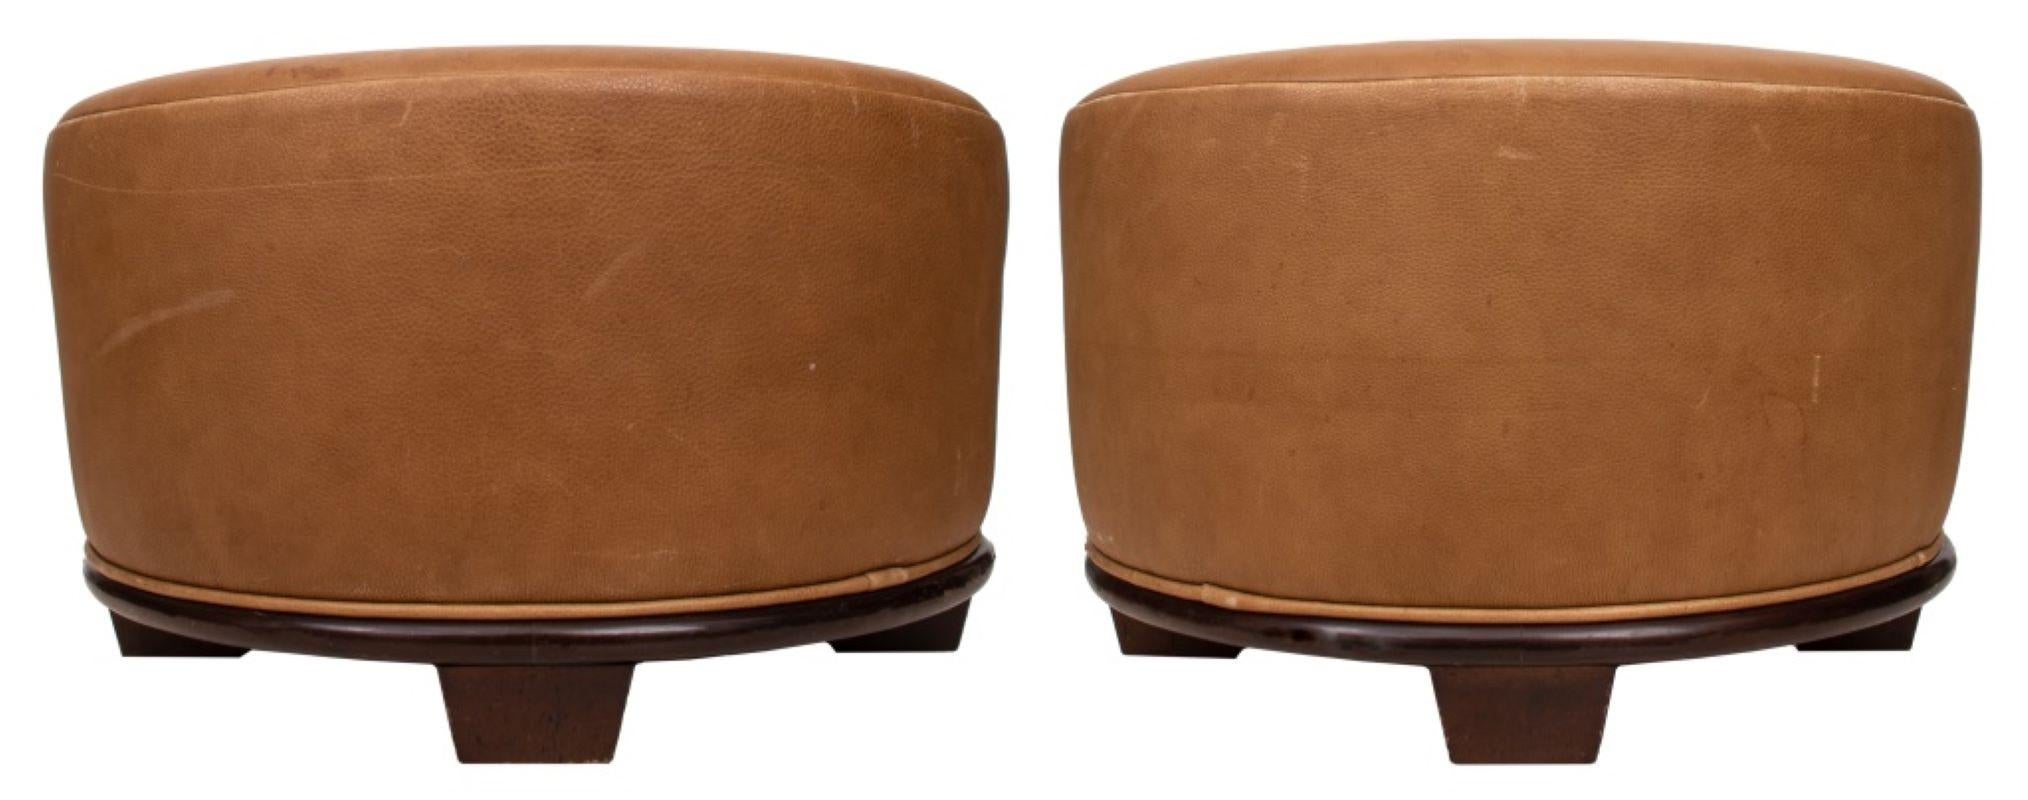 Pair of Art Deco Revival Modern round ottoman stools with brown leather upholstery and hardwood bases, each mounted on four caster wheels. 15